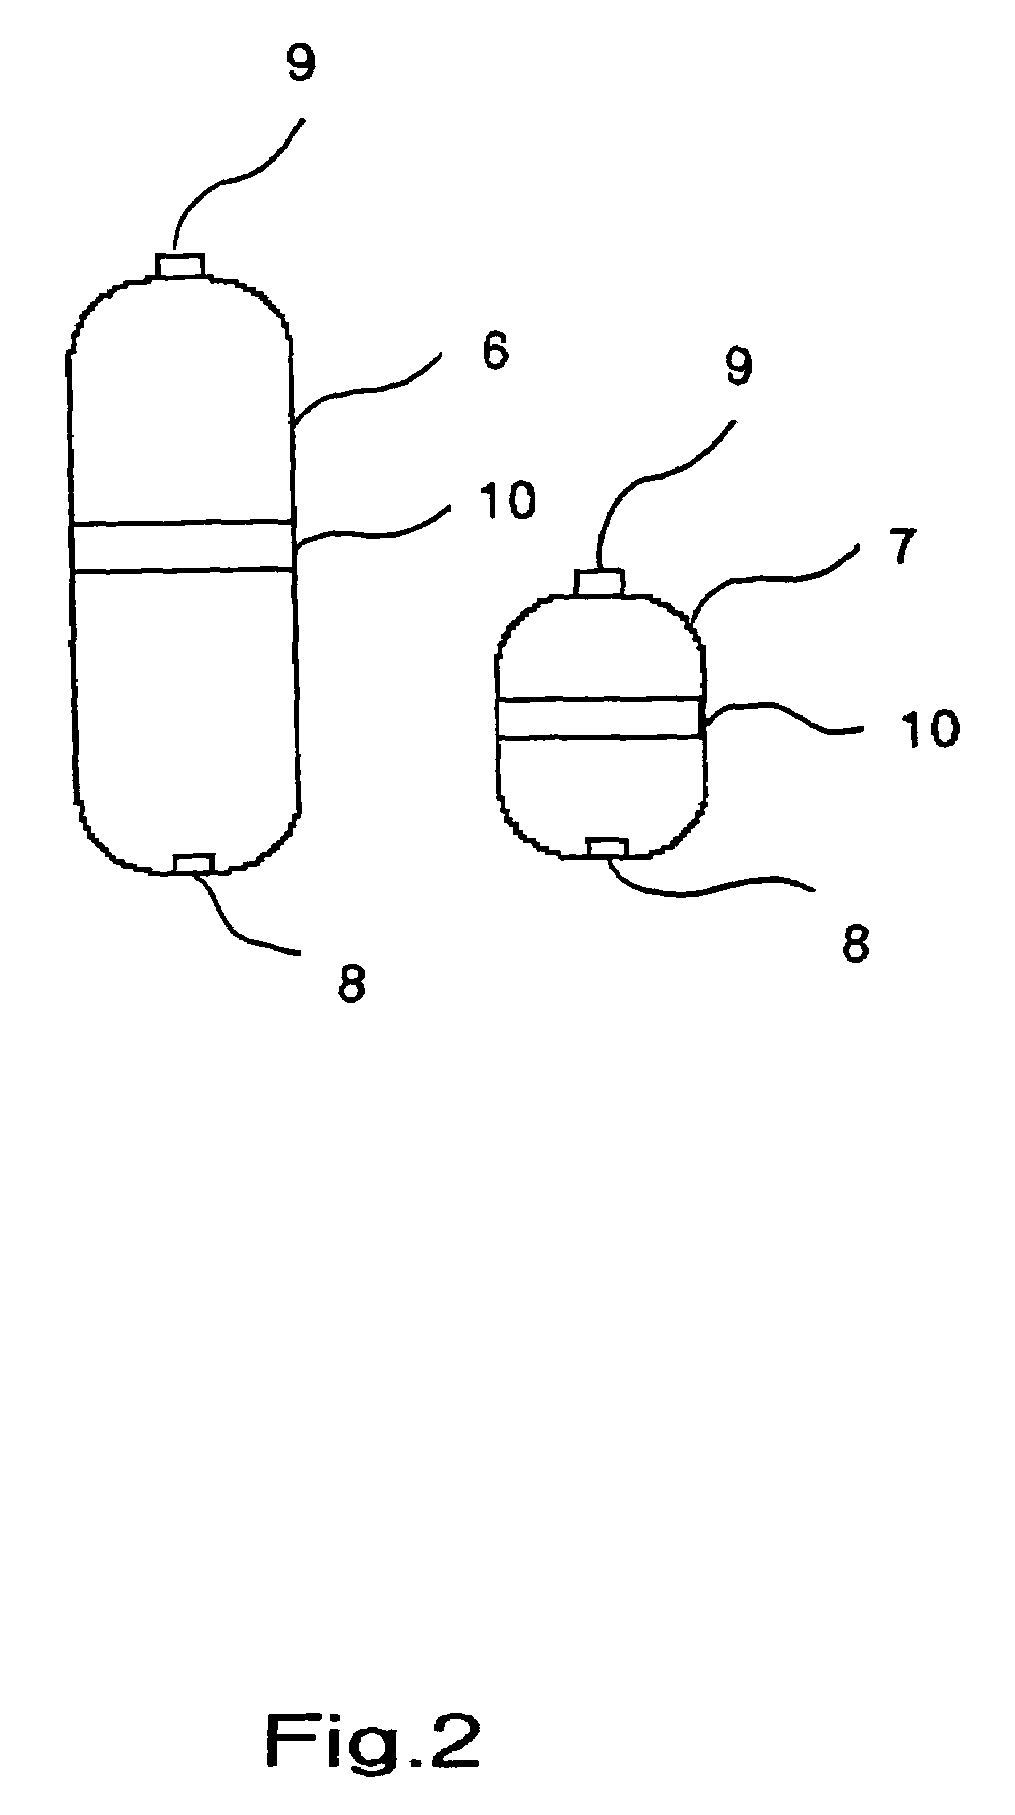 Platform and system for propellant tank storage and transfer in space